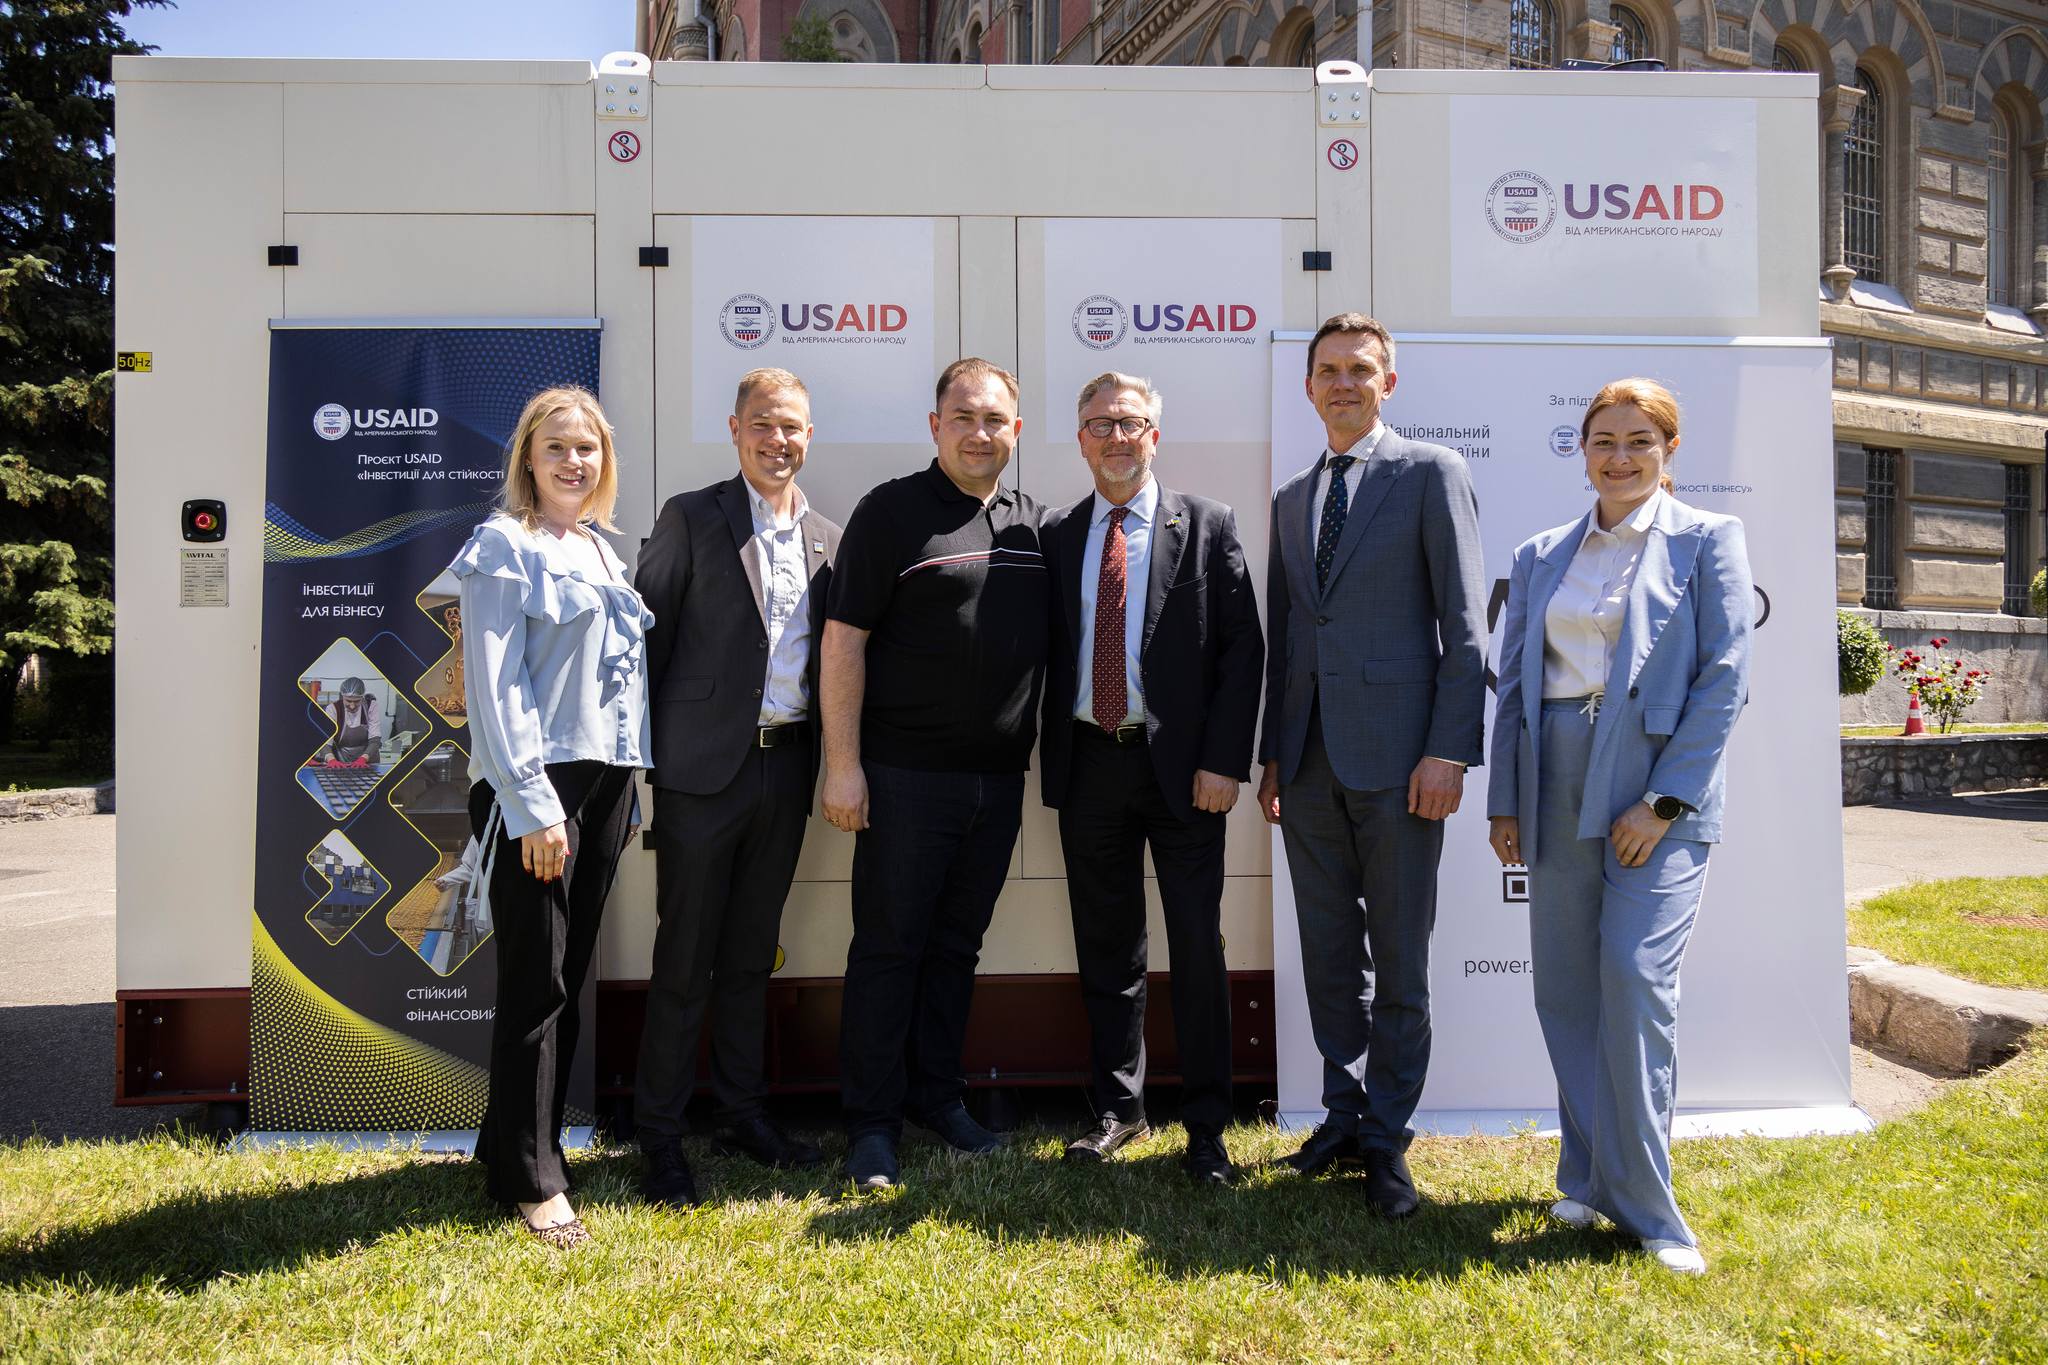 USAID will help insure war risks for small and medium-sized enterprises